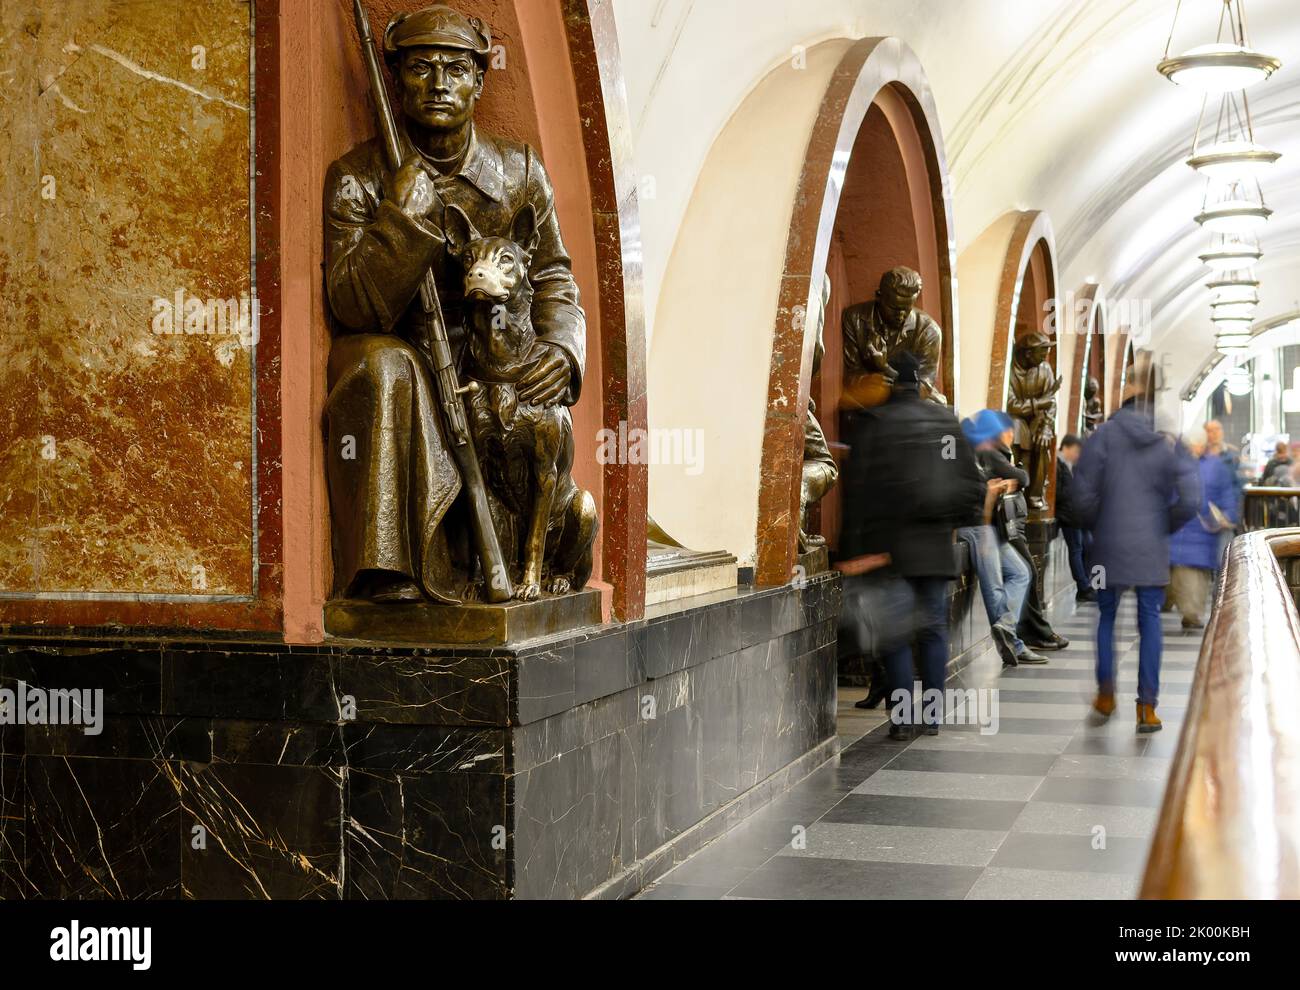 MOSCOW, RUSSIA - NOVEMBER 16, 2017:Moscow subway station Revolution Square. Bronze Sculpture of soviet soldier with dog Stock Photo